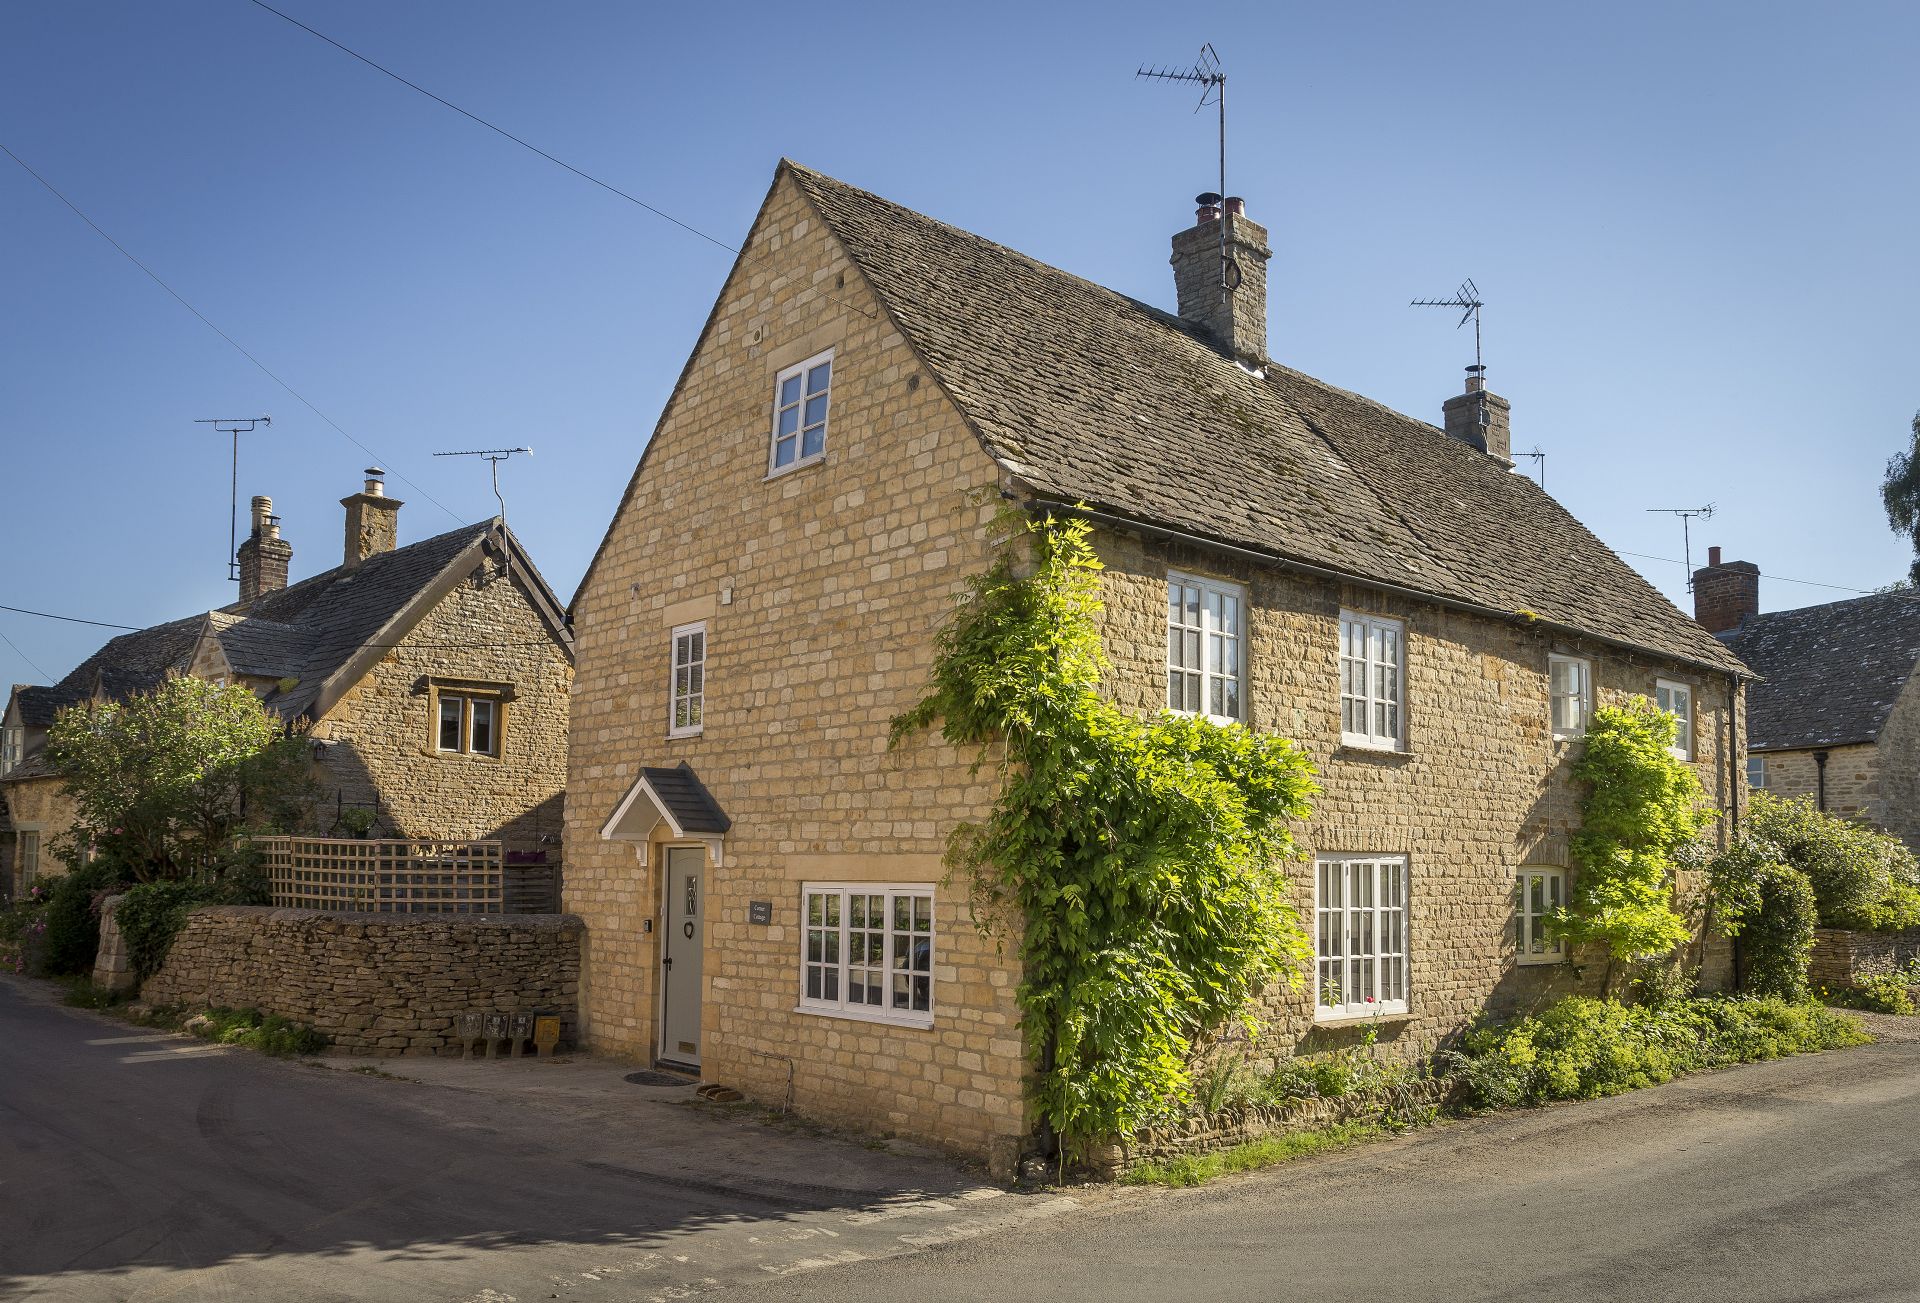 Corner Cottage is located in Upper and Lower Oddington